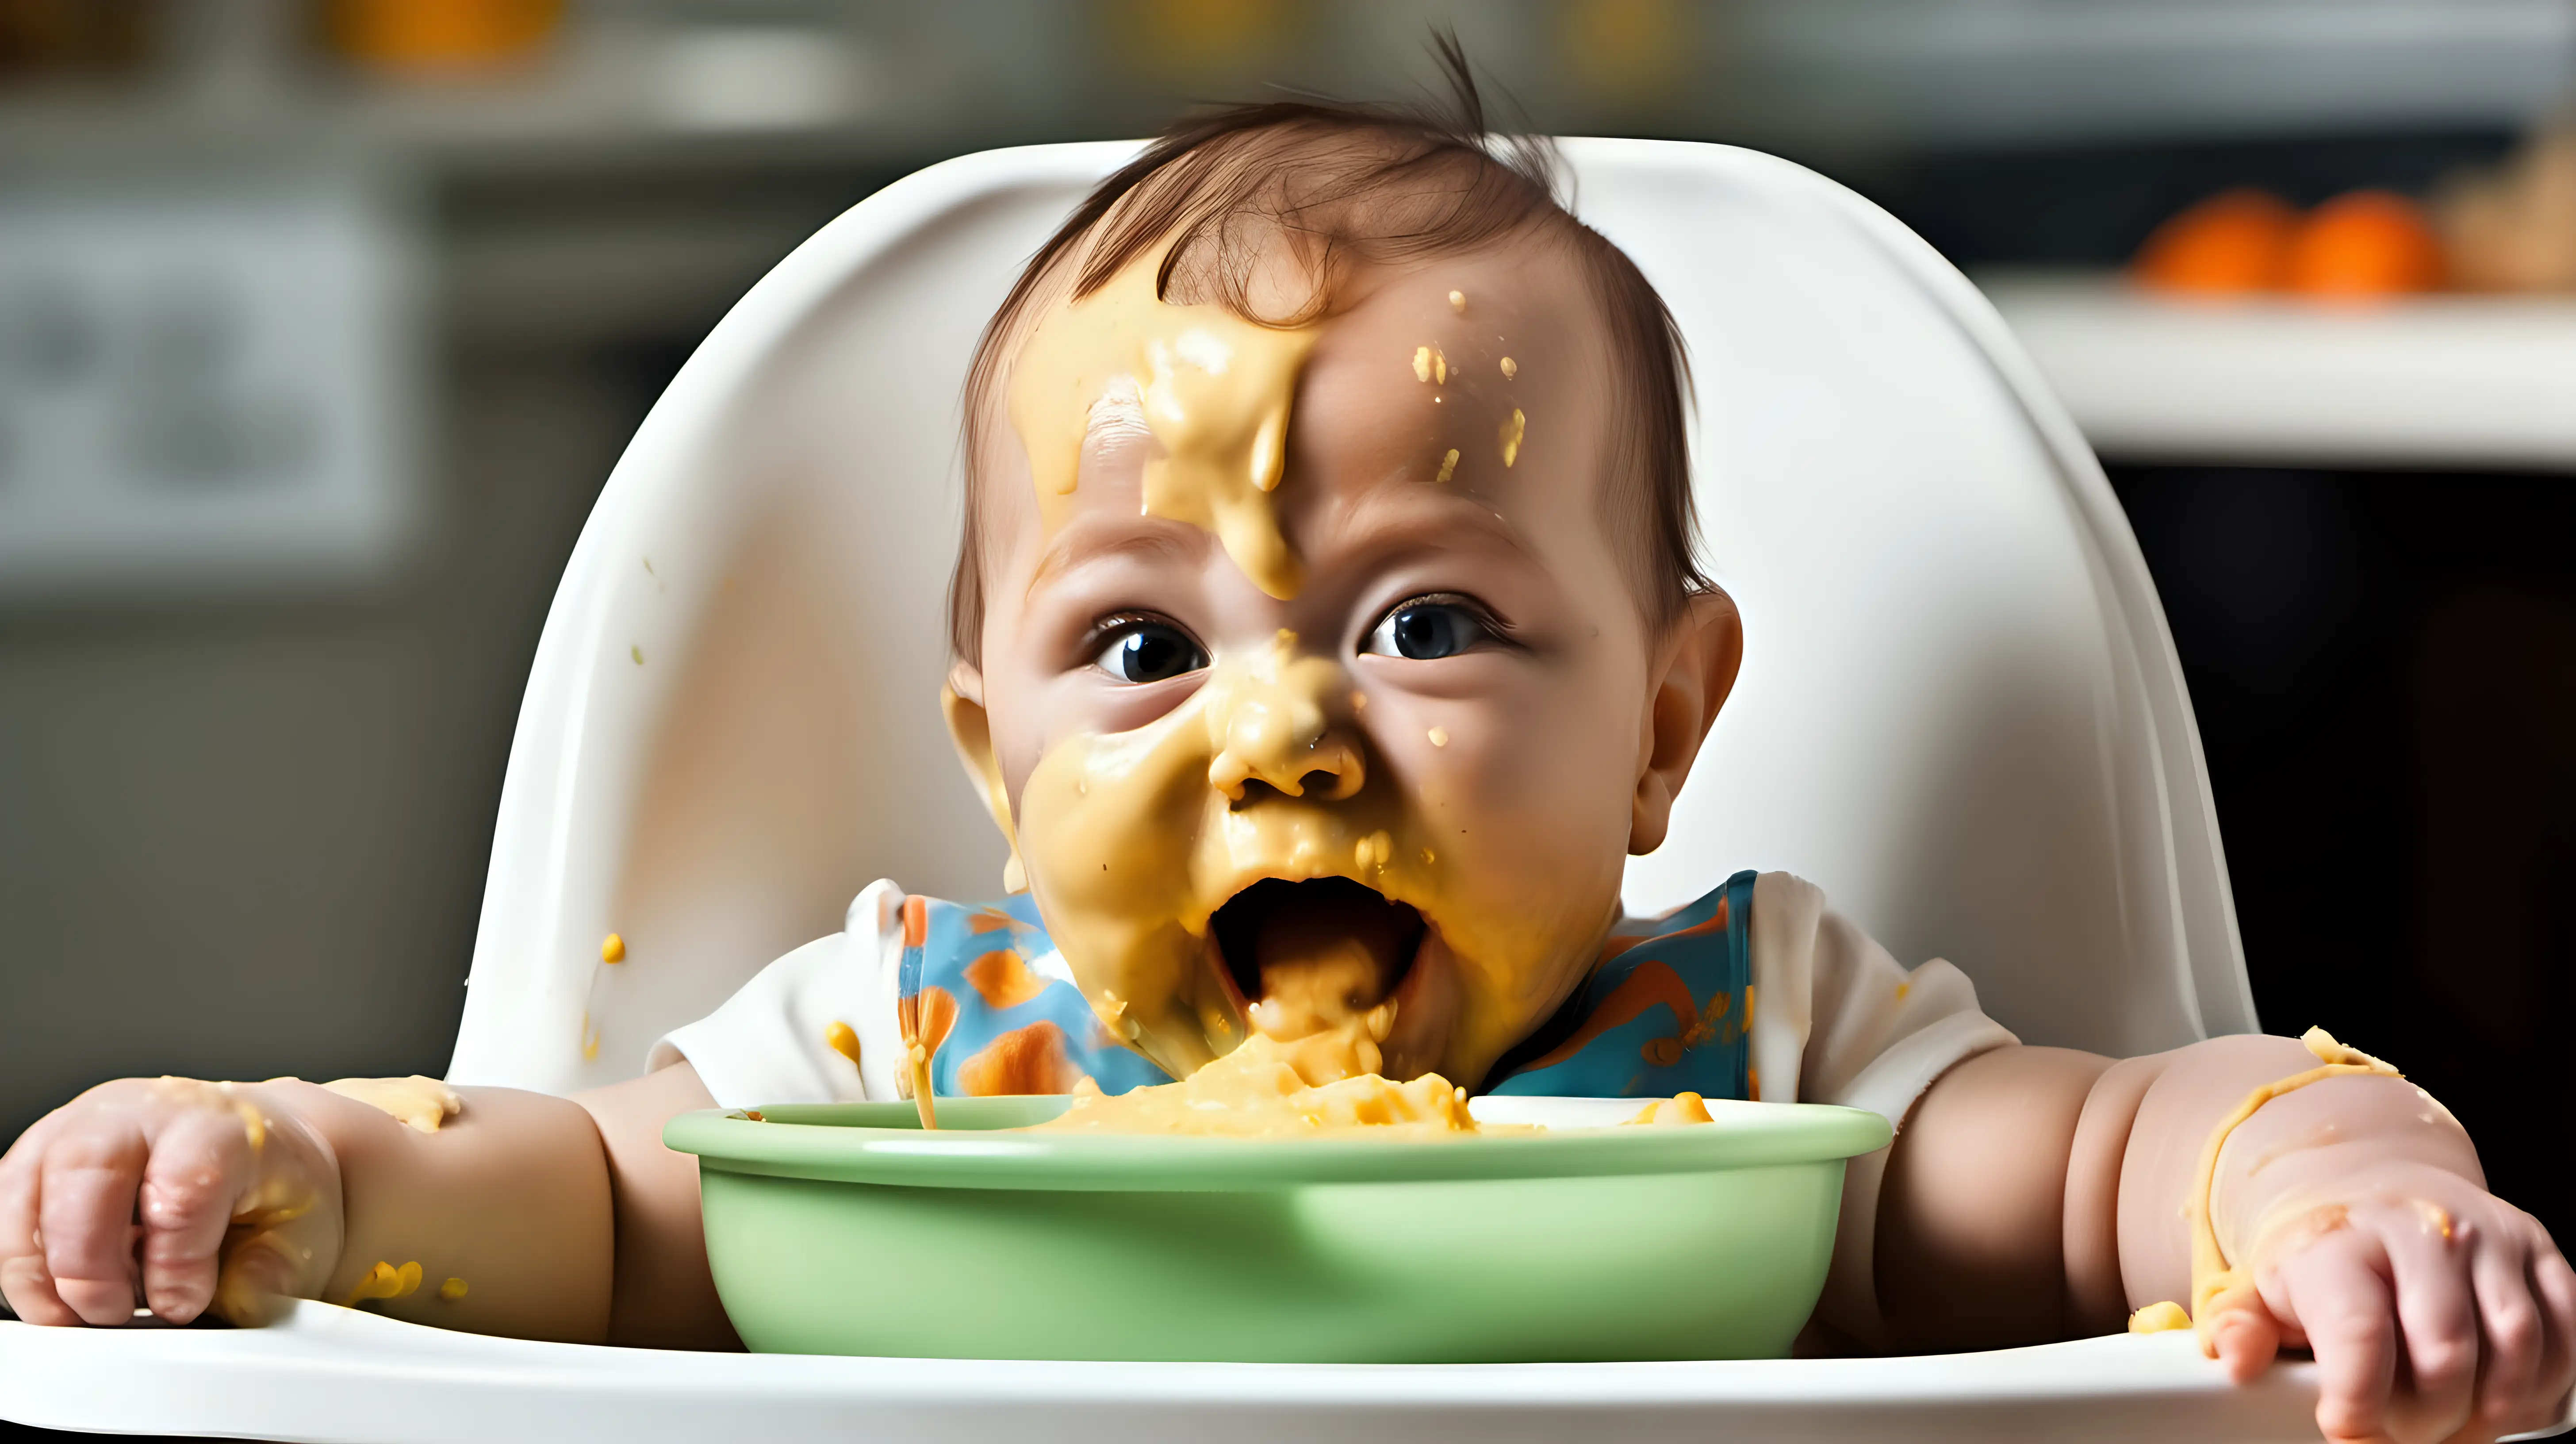 Adorable Baby Messily Enjoying Pureed Food in High Chair